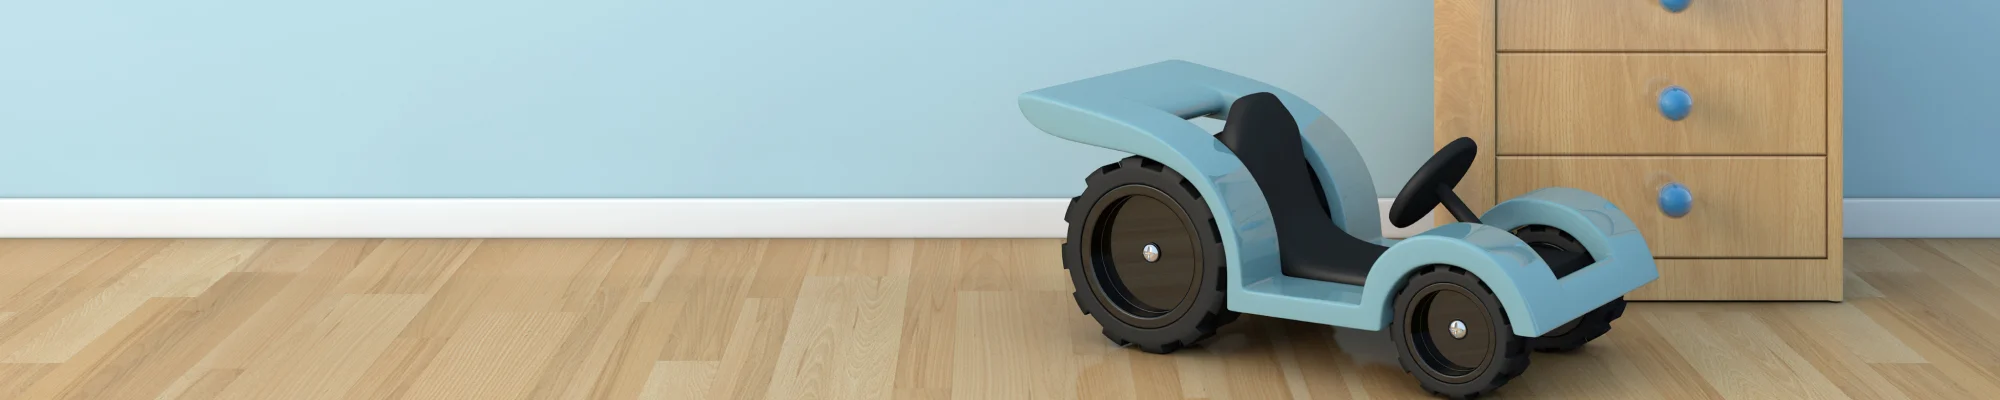 Blue car toy in kid's room with natural stained waterproof flooring